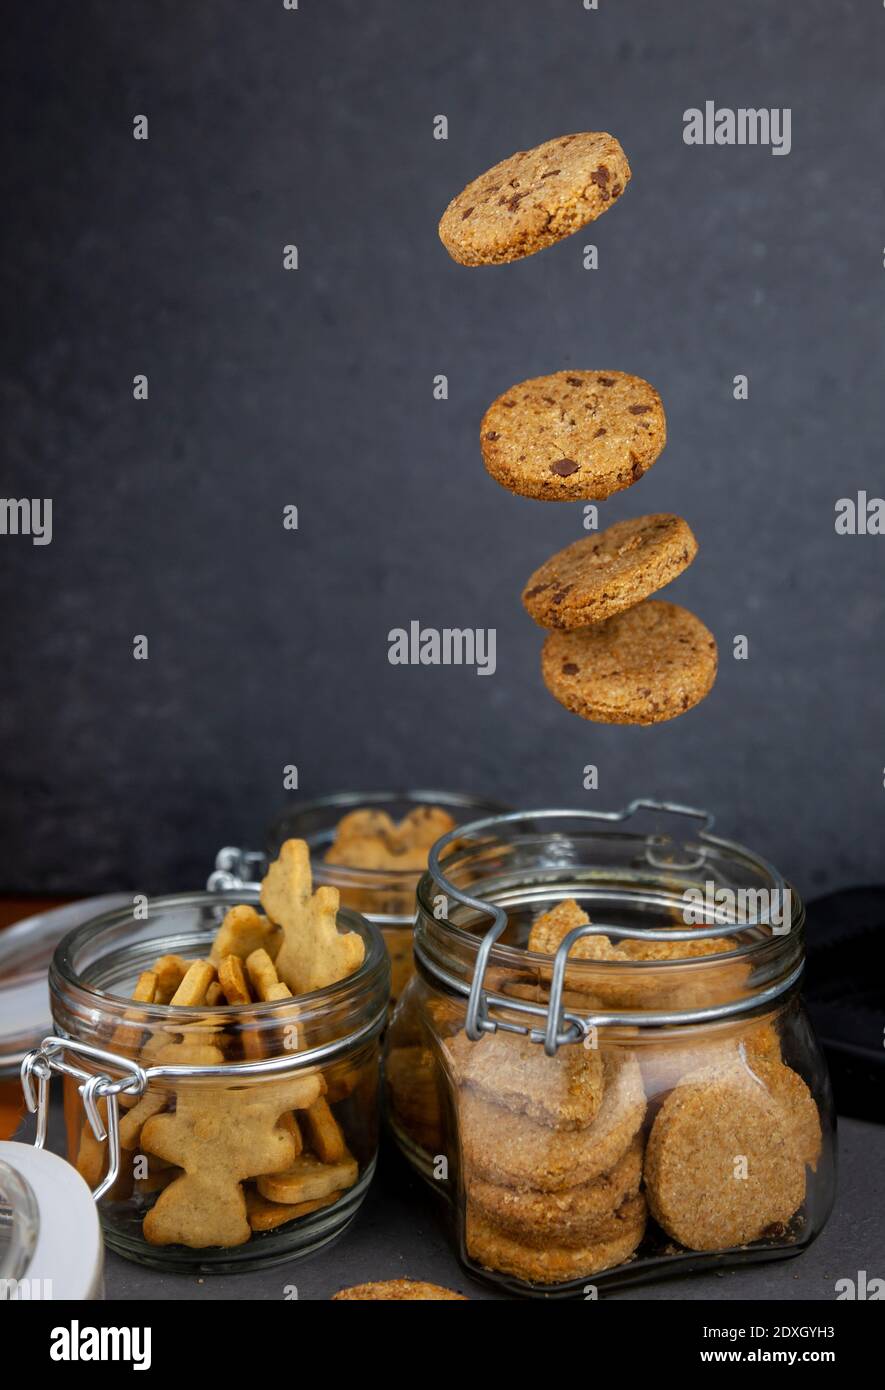 Round homemade cookies flies in a jar. Levitating cookies. Biscuit sweet pastries homemade flour products. Stock Photo